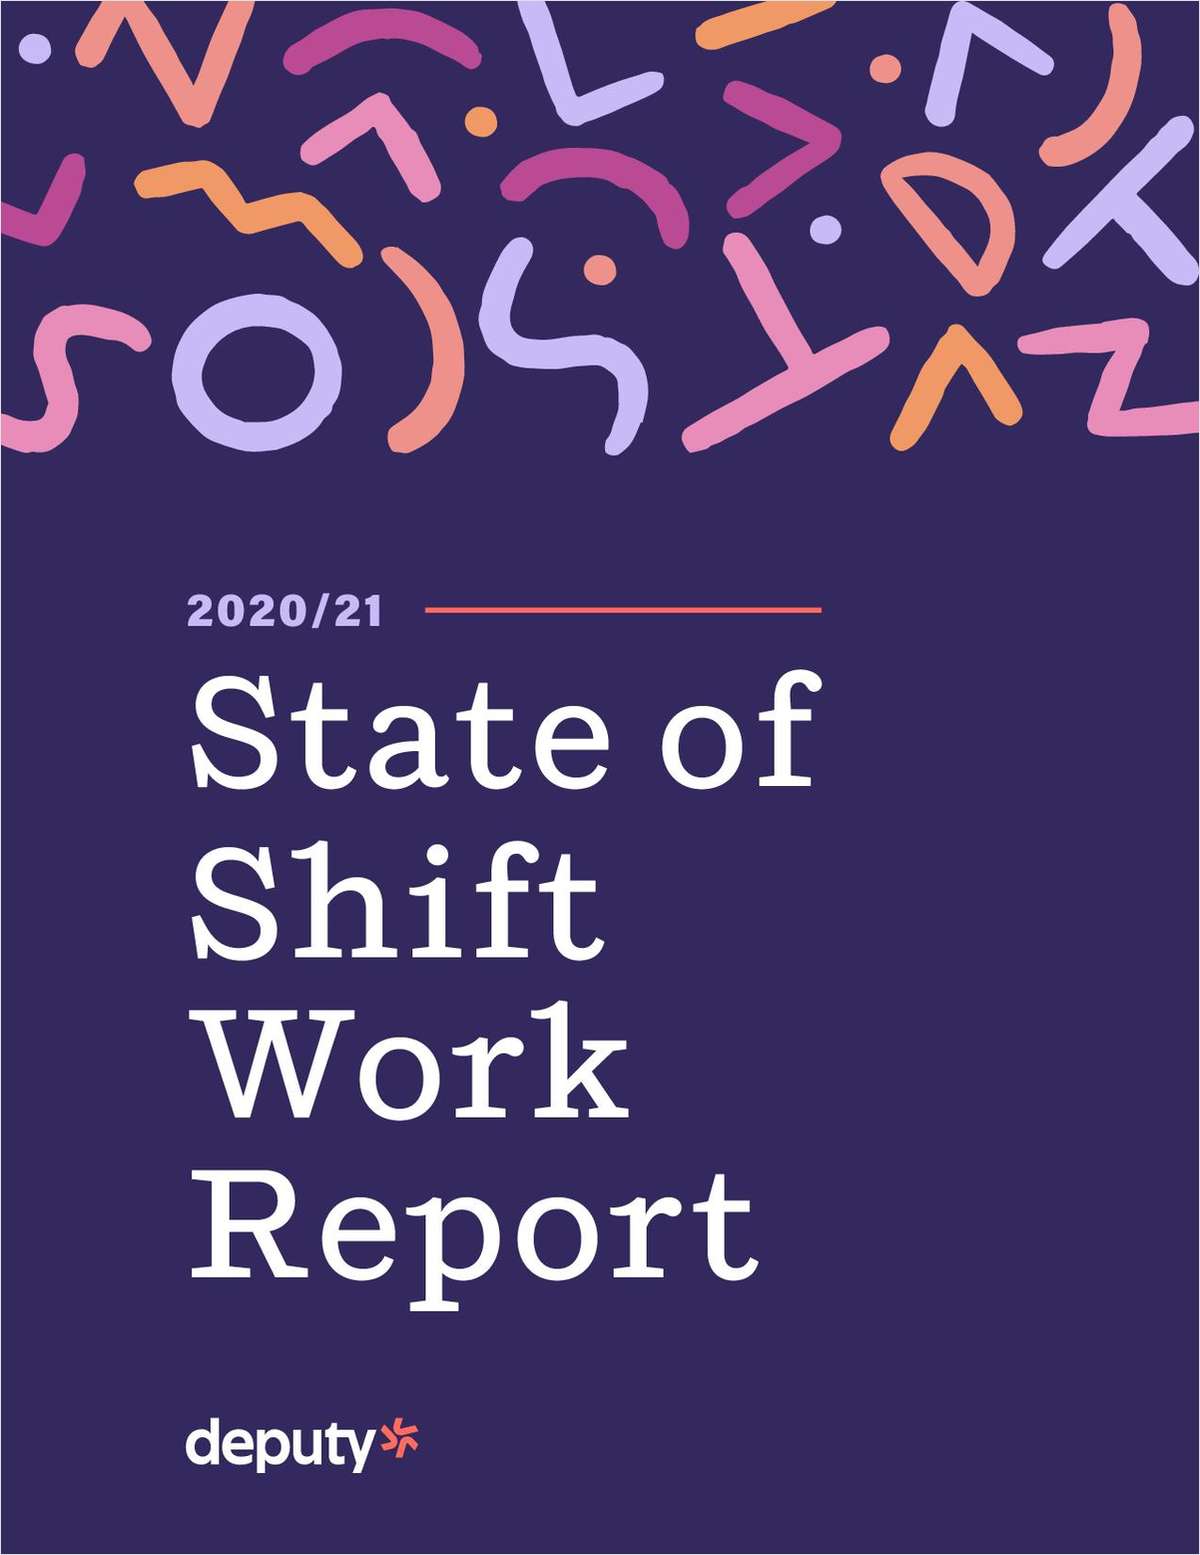 2020/21 State of Shift Work Report